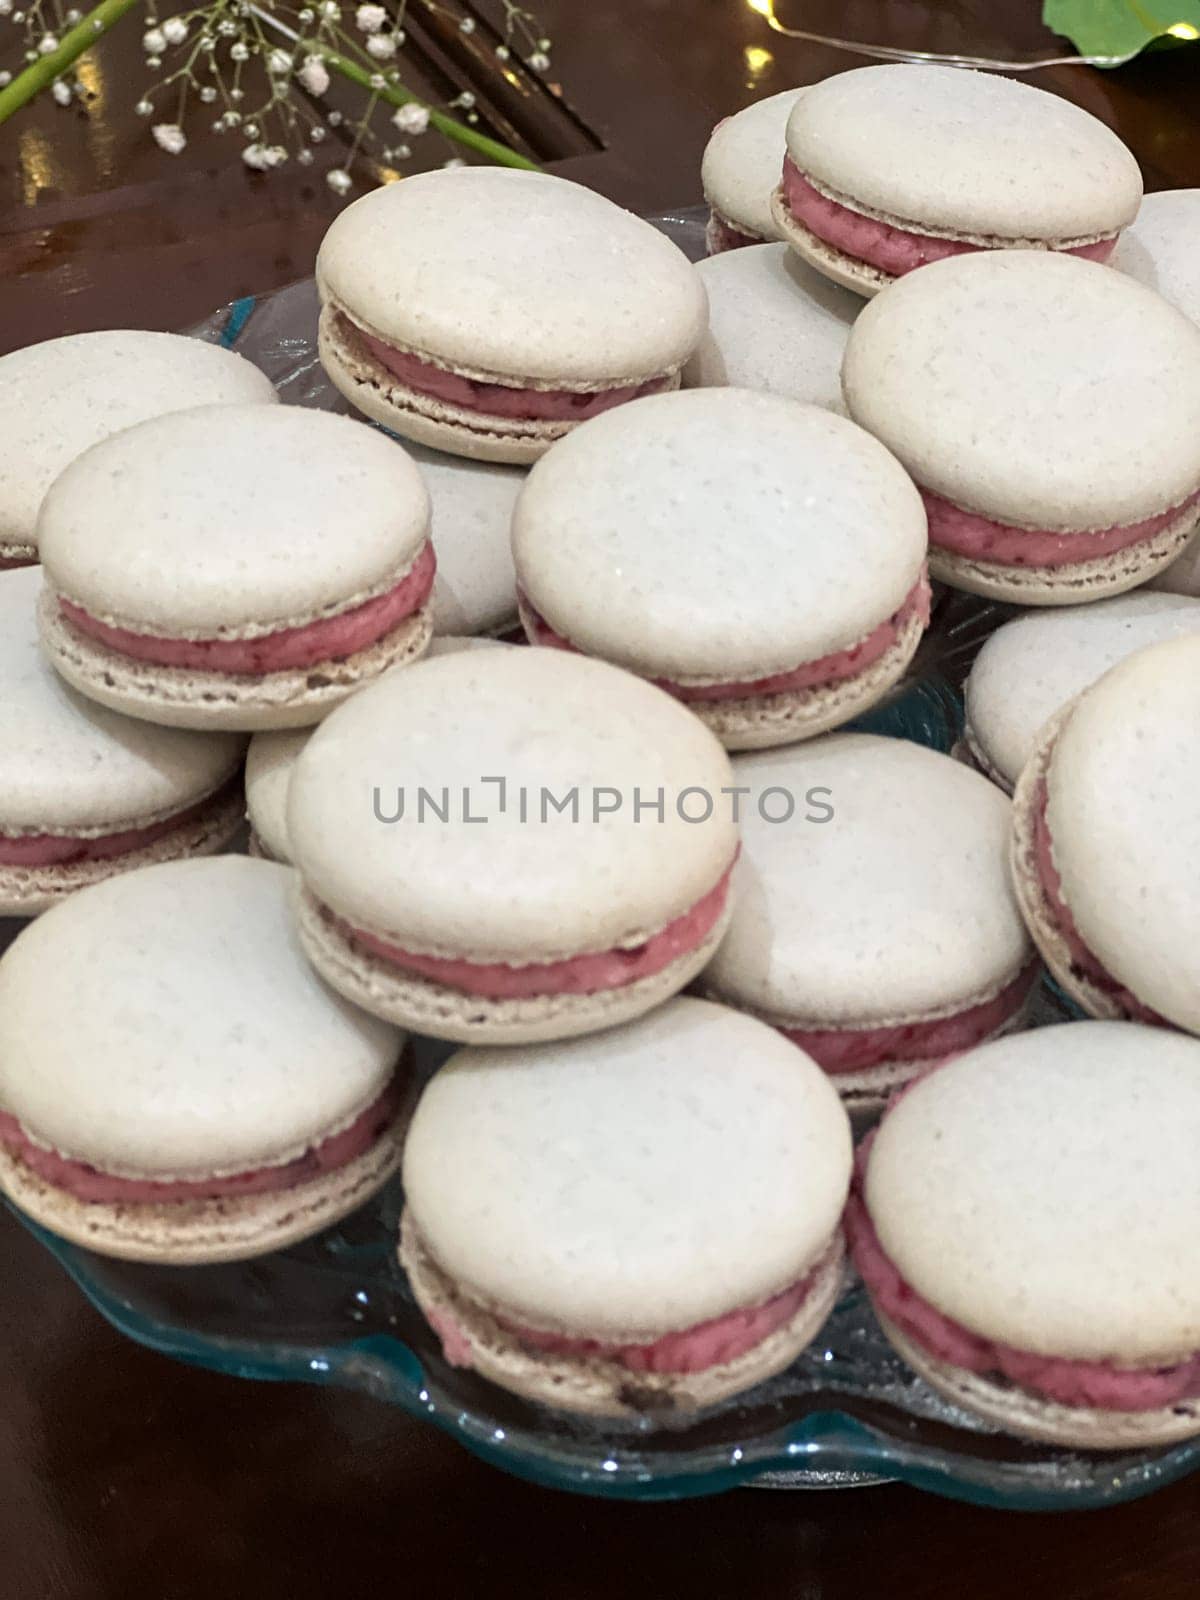 Silver French Macarons at Wedding Reception by joshuaraineyphotography